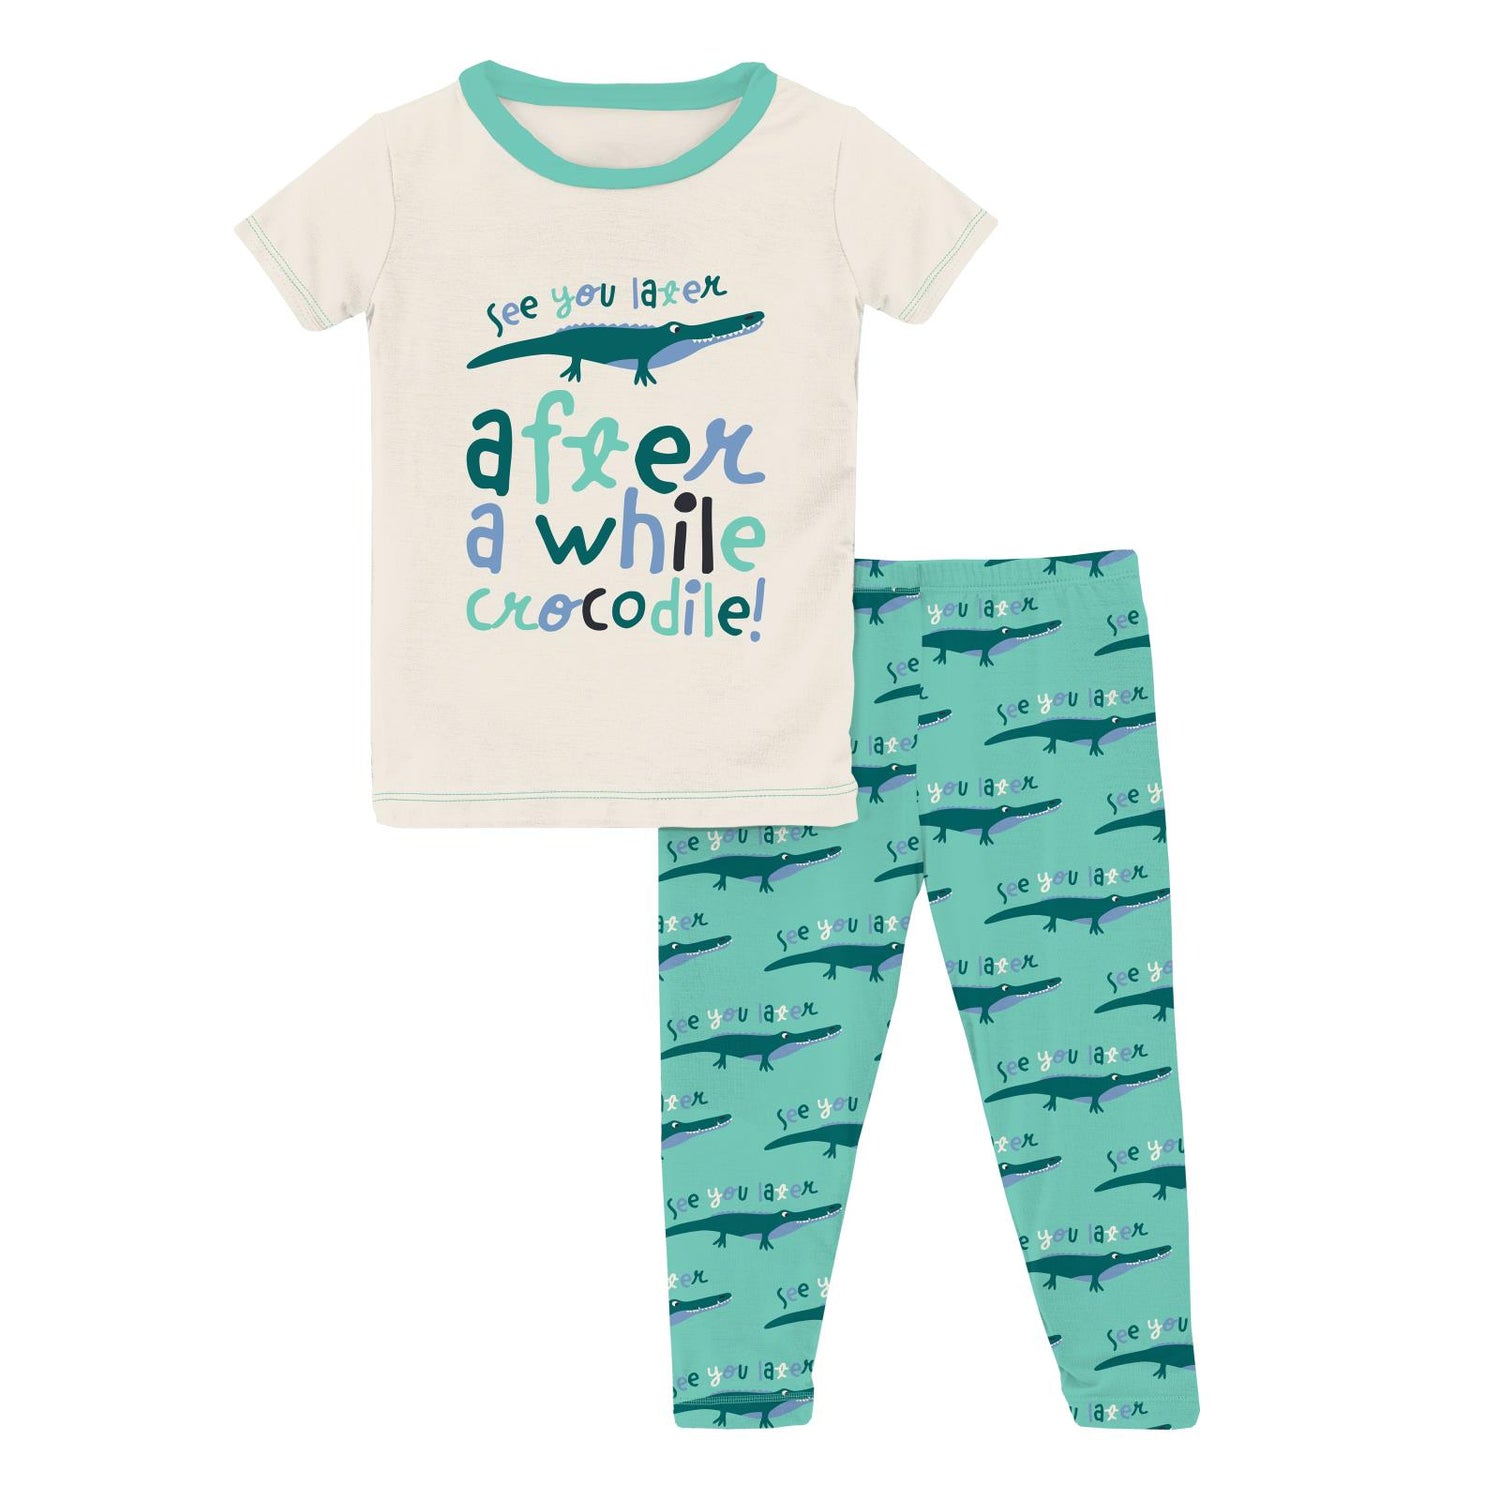 Short Sleeve Graphic Tee Pajama Set in Glass Later Alligator